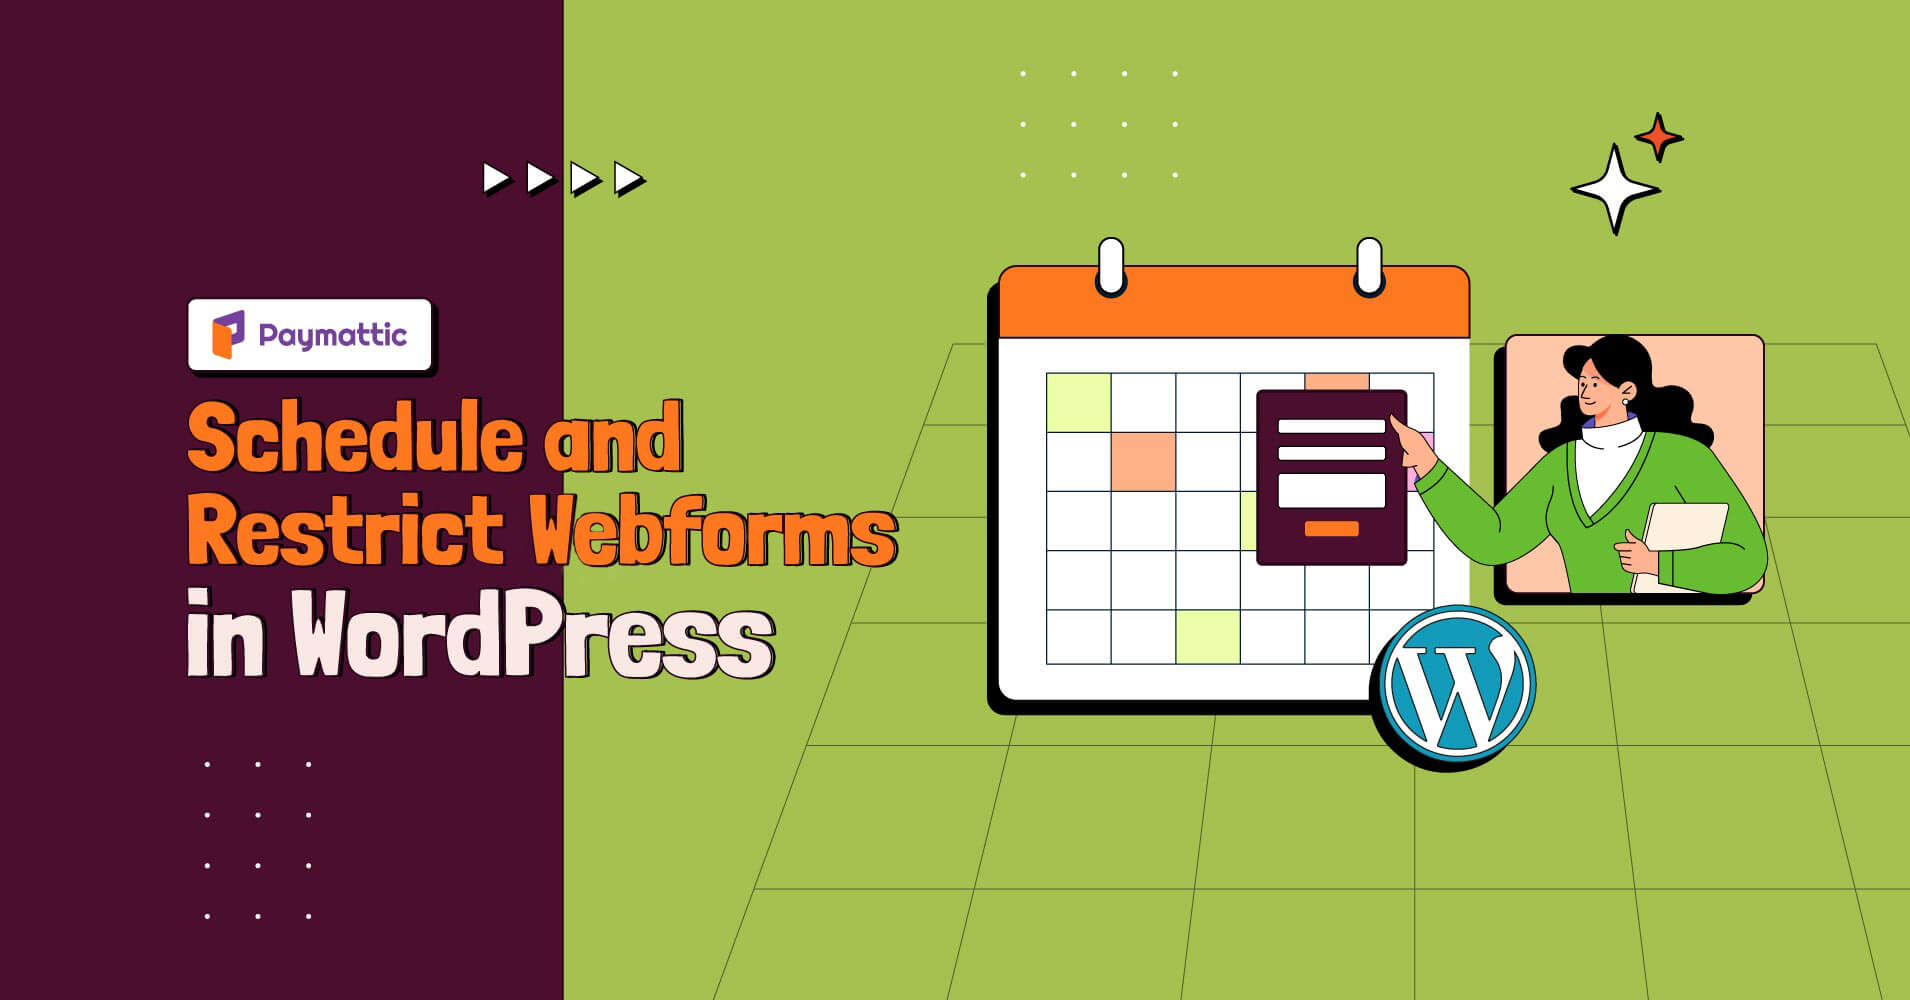 How to Schedule and Restrict Webforms in WordPress? 